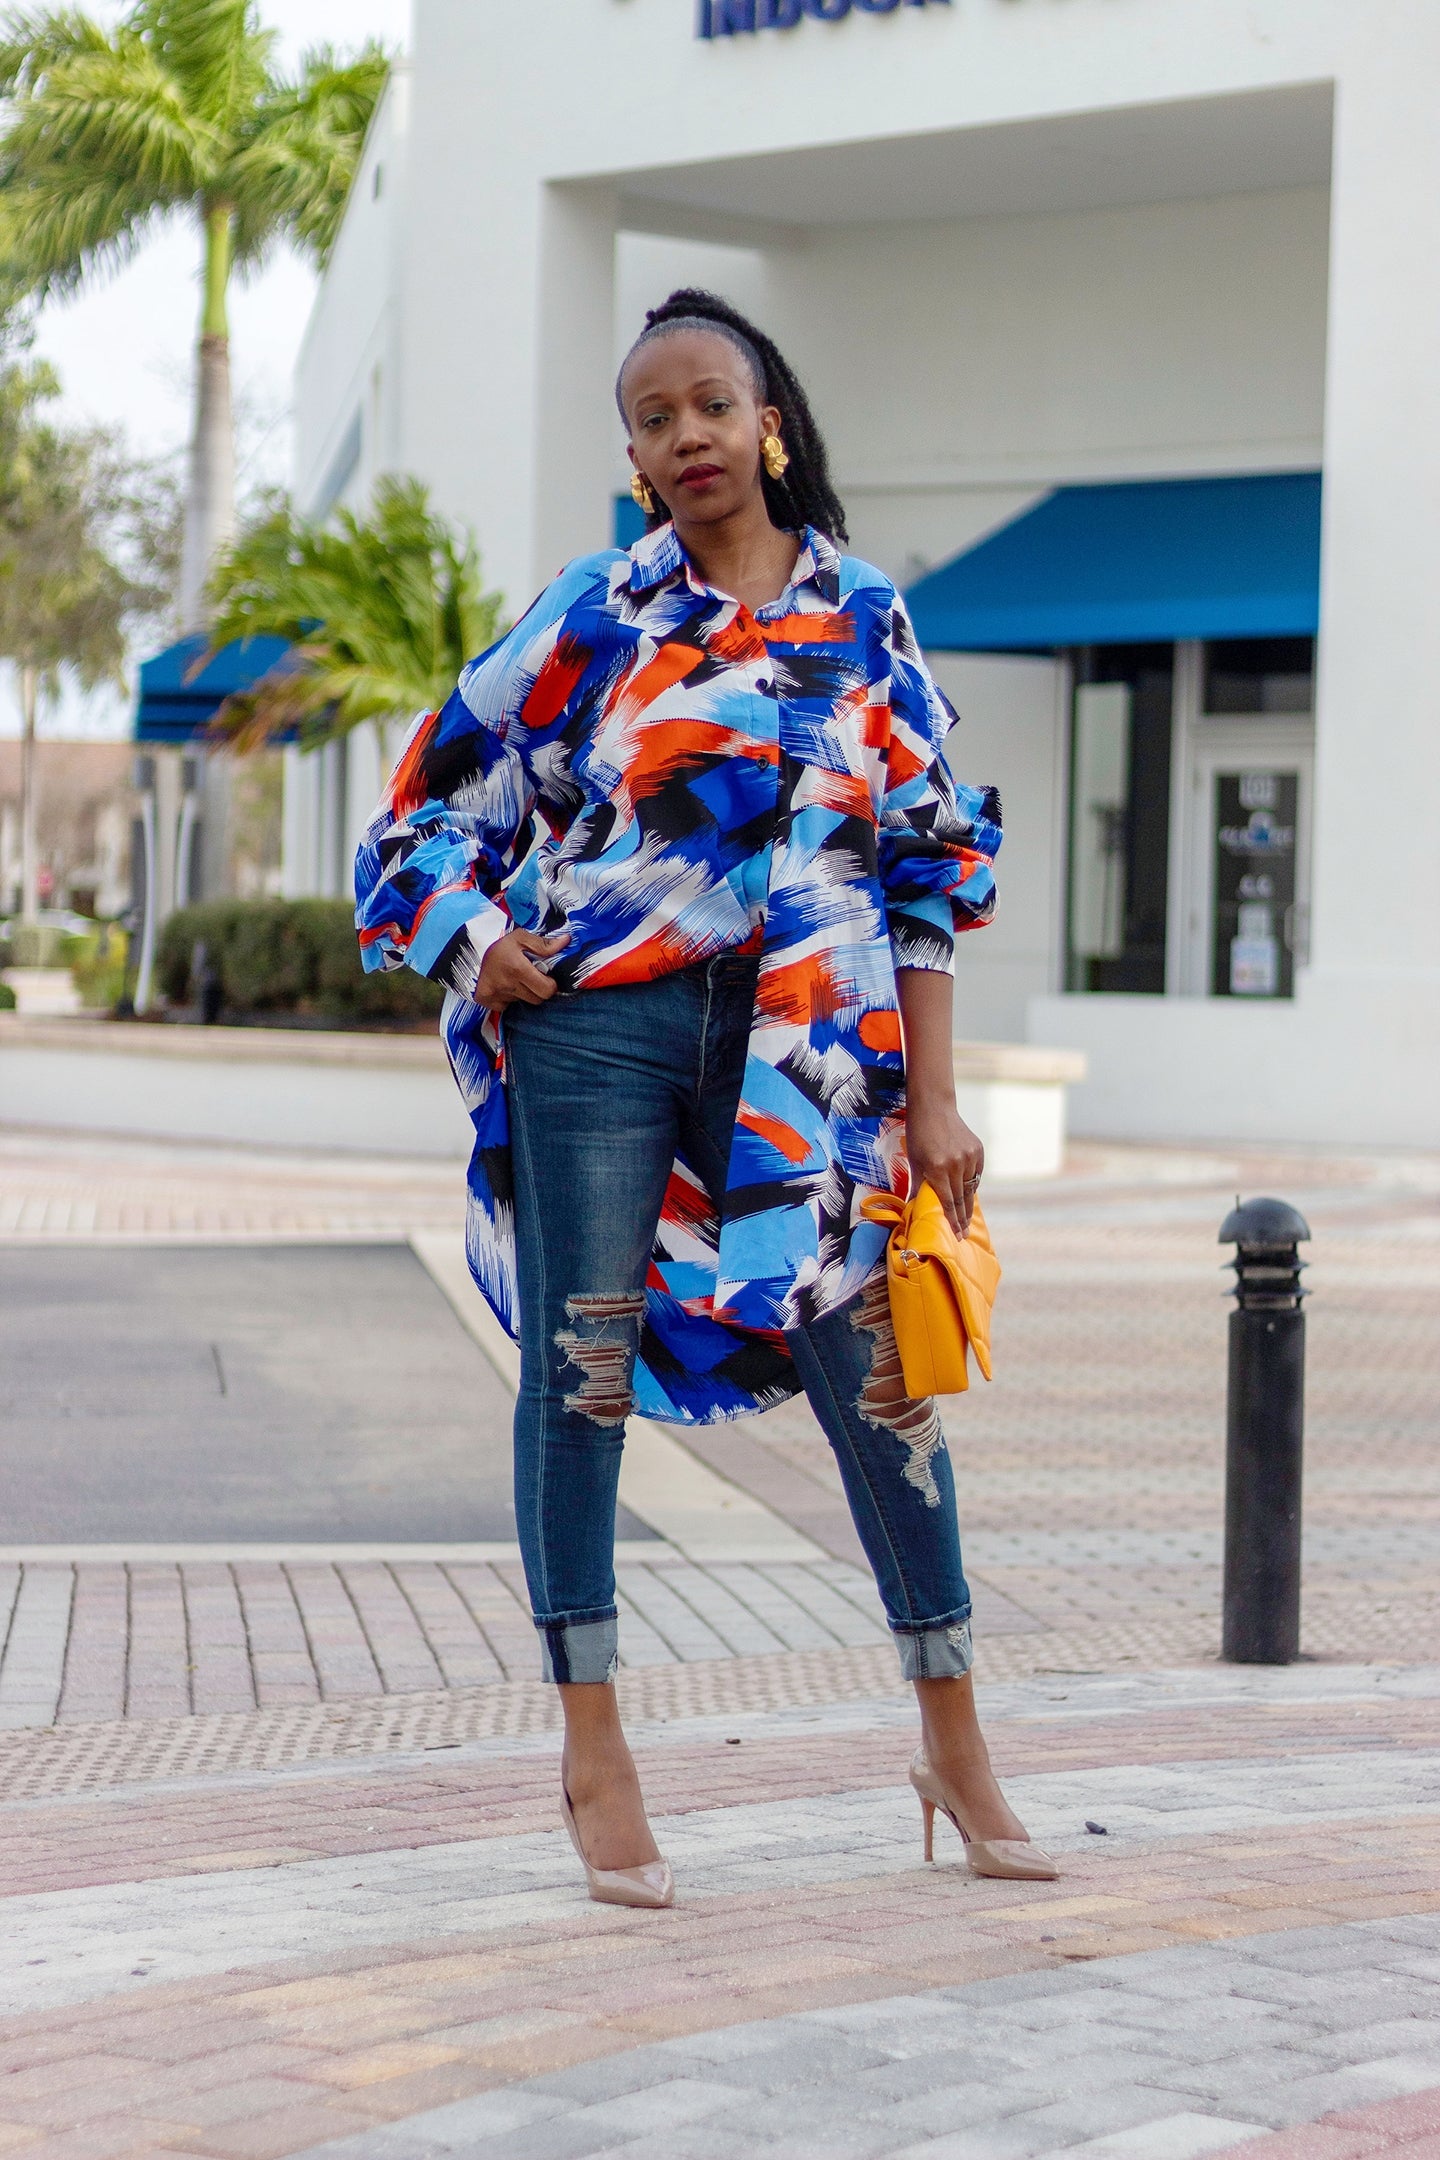 African Print/Ankara/Kitenge High-Low Oversized Shirt with Drop Sleeves and Pockets - White/Blue and Orange Swirl Print